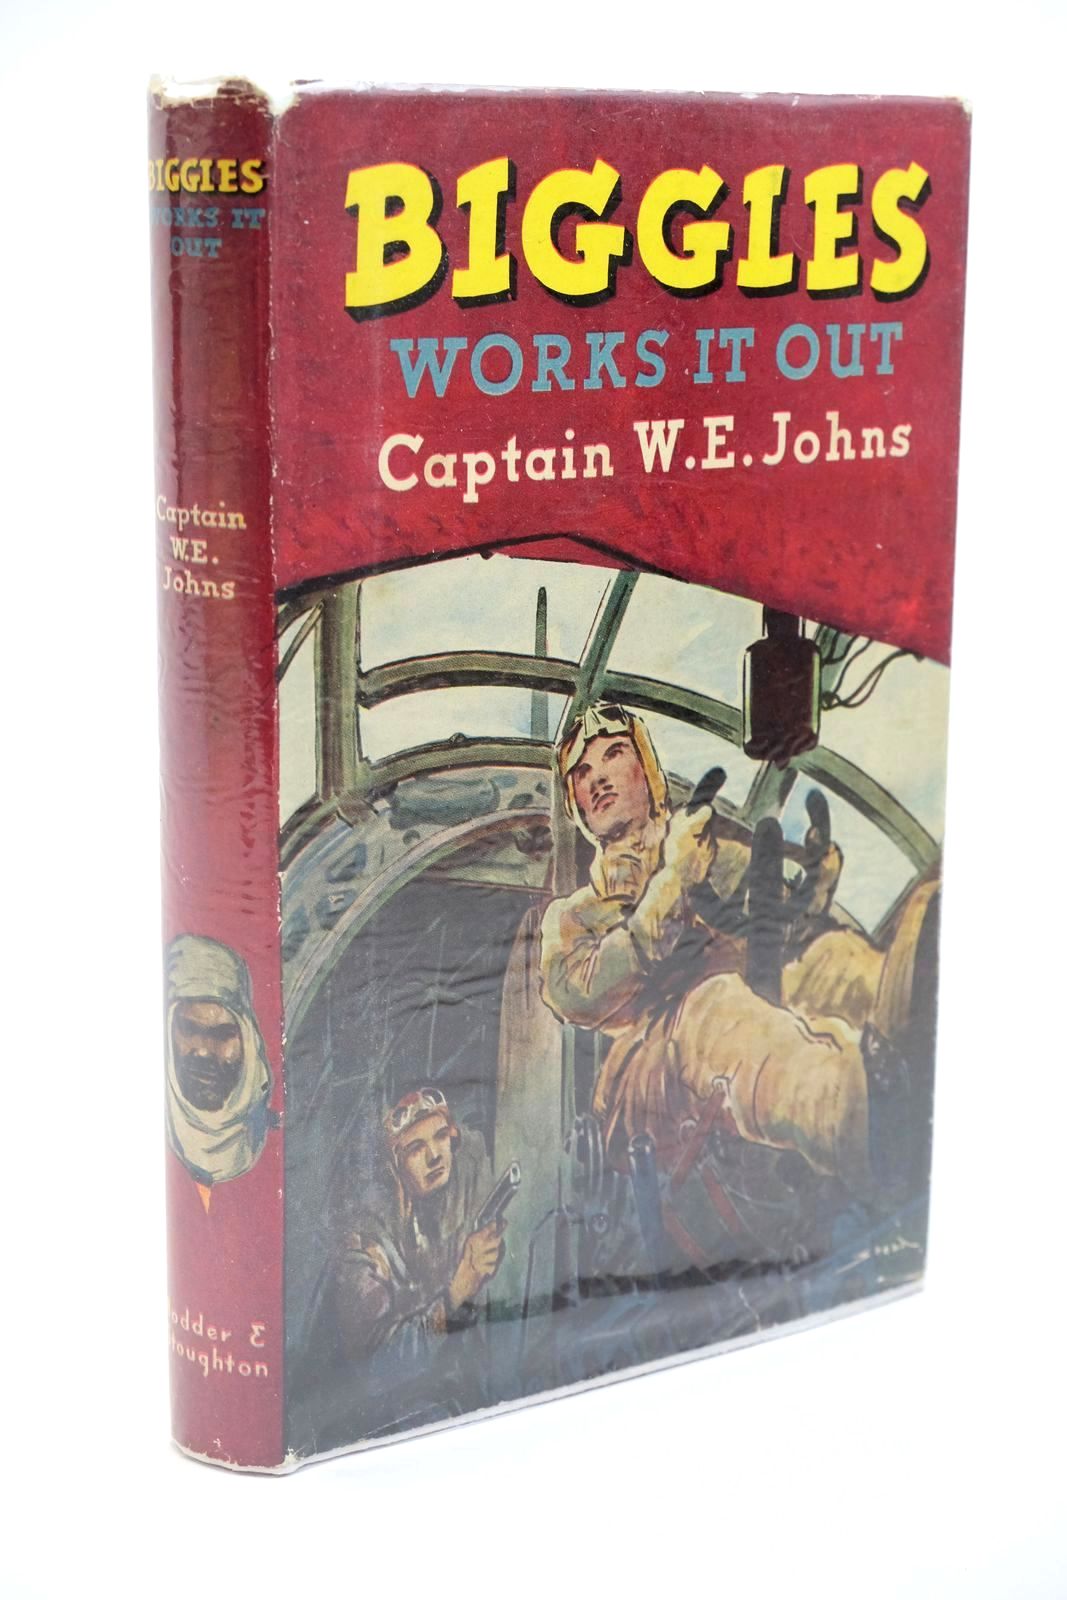 Photo of BIGGLES WORKS IT OUT written by Johns, W.E. illustrated by Stead,  published by Hodder & Stoughton (STOCK CODE: 1323208)  for sale by Stella & Rose's Books